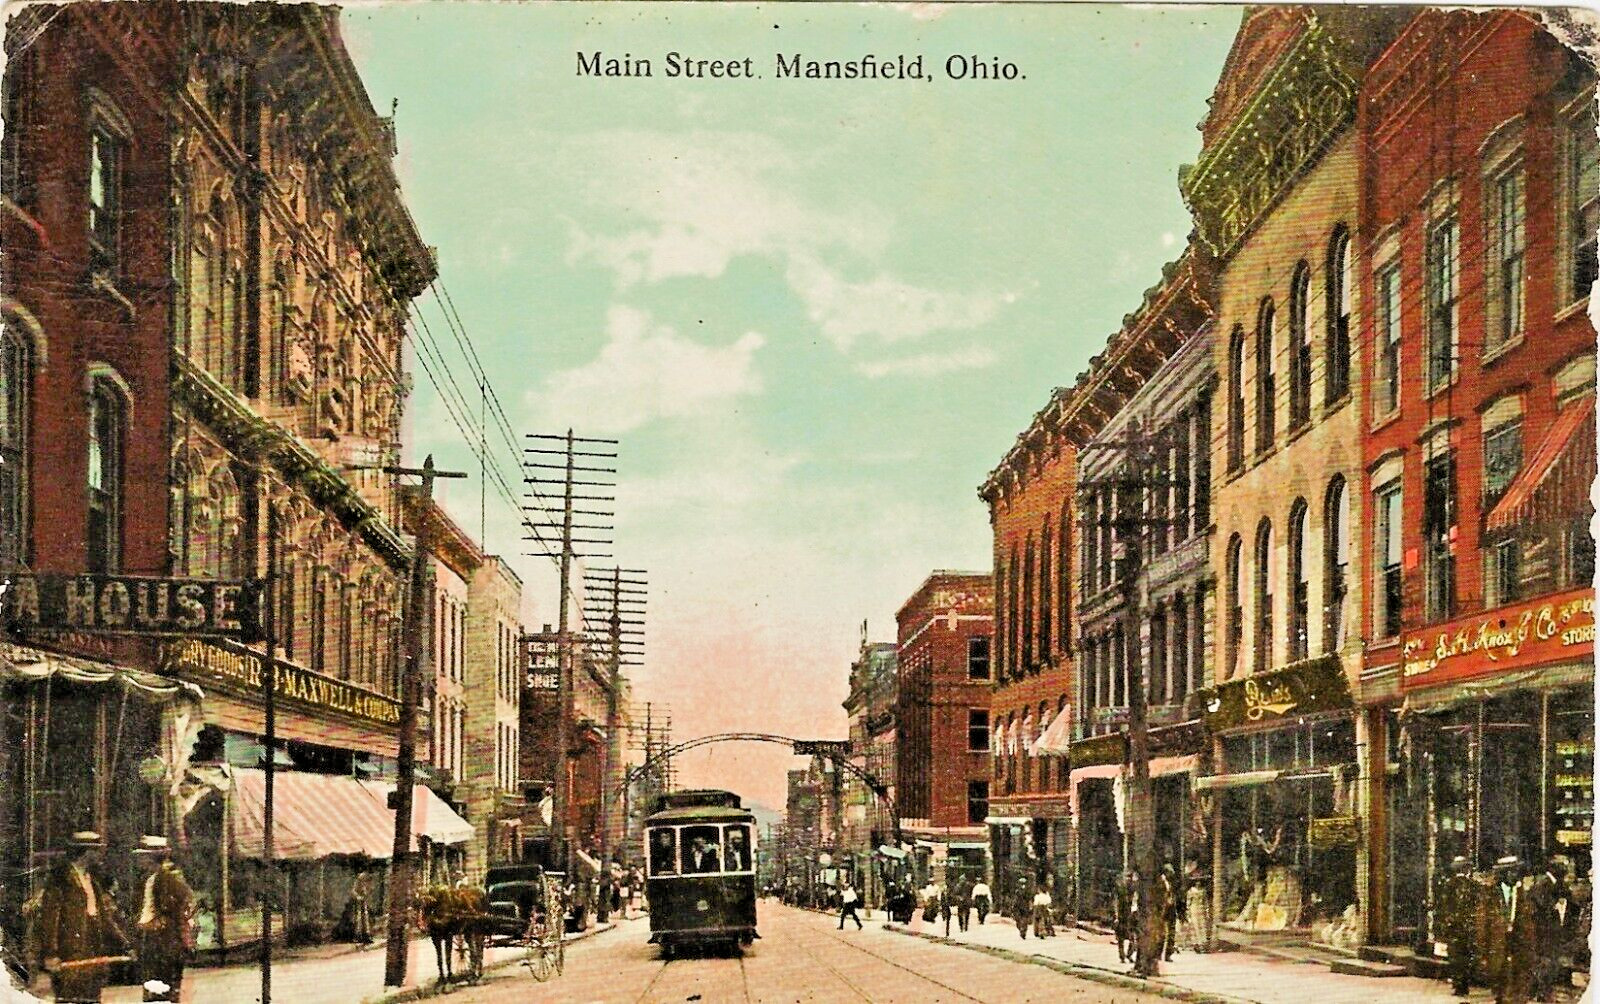 Mansfield OH S.H. Knox 5 & 10 & Maxwell & Co Dry Goods on 1913 Main Street